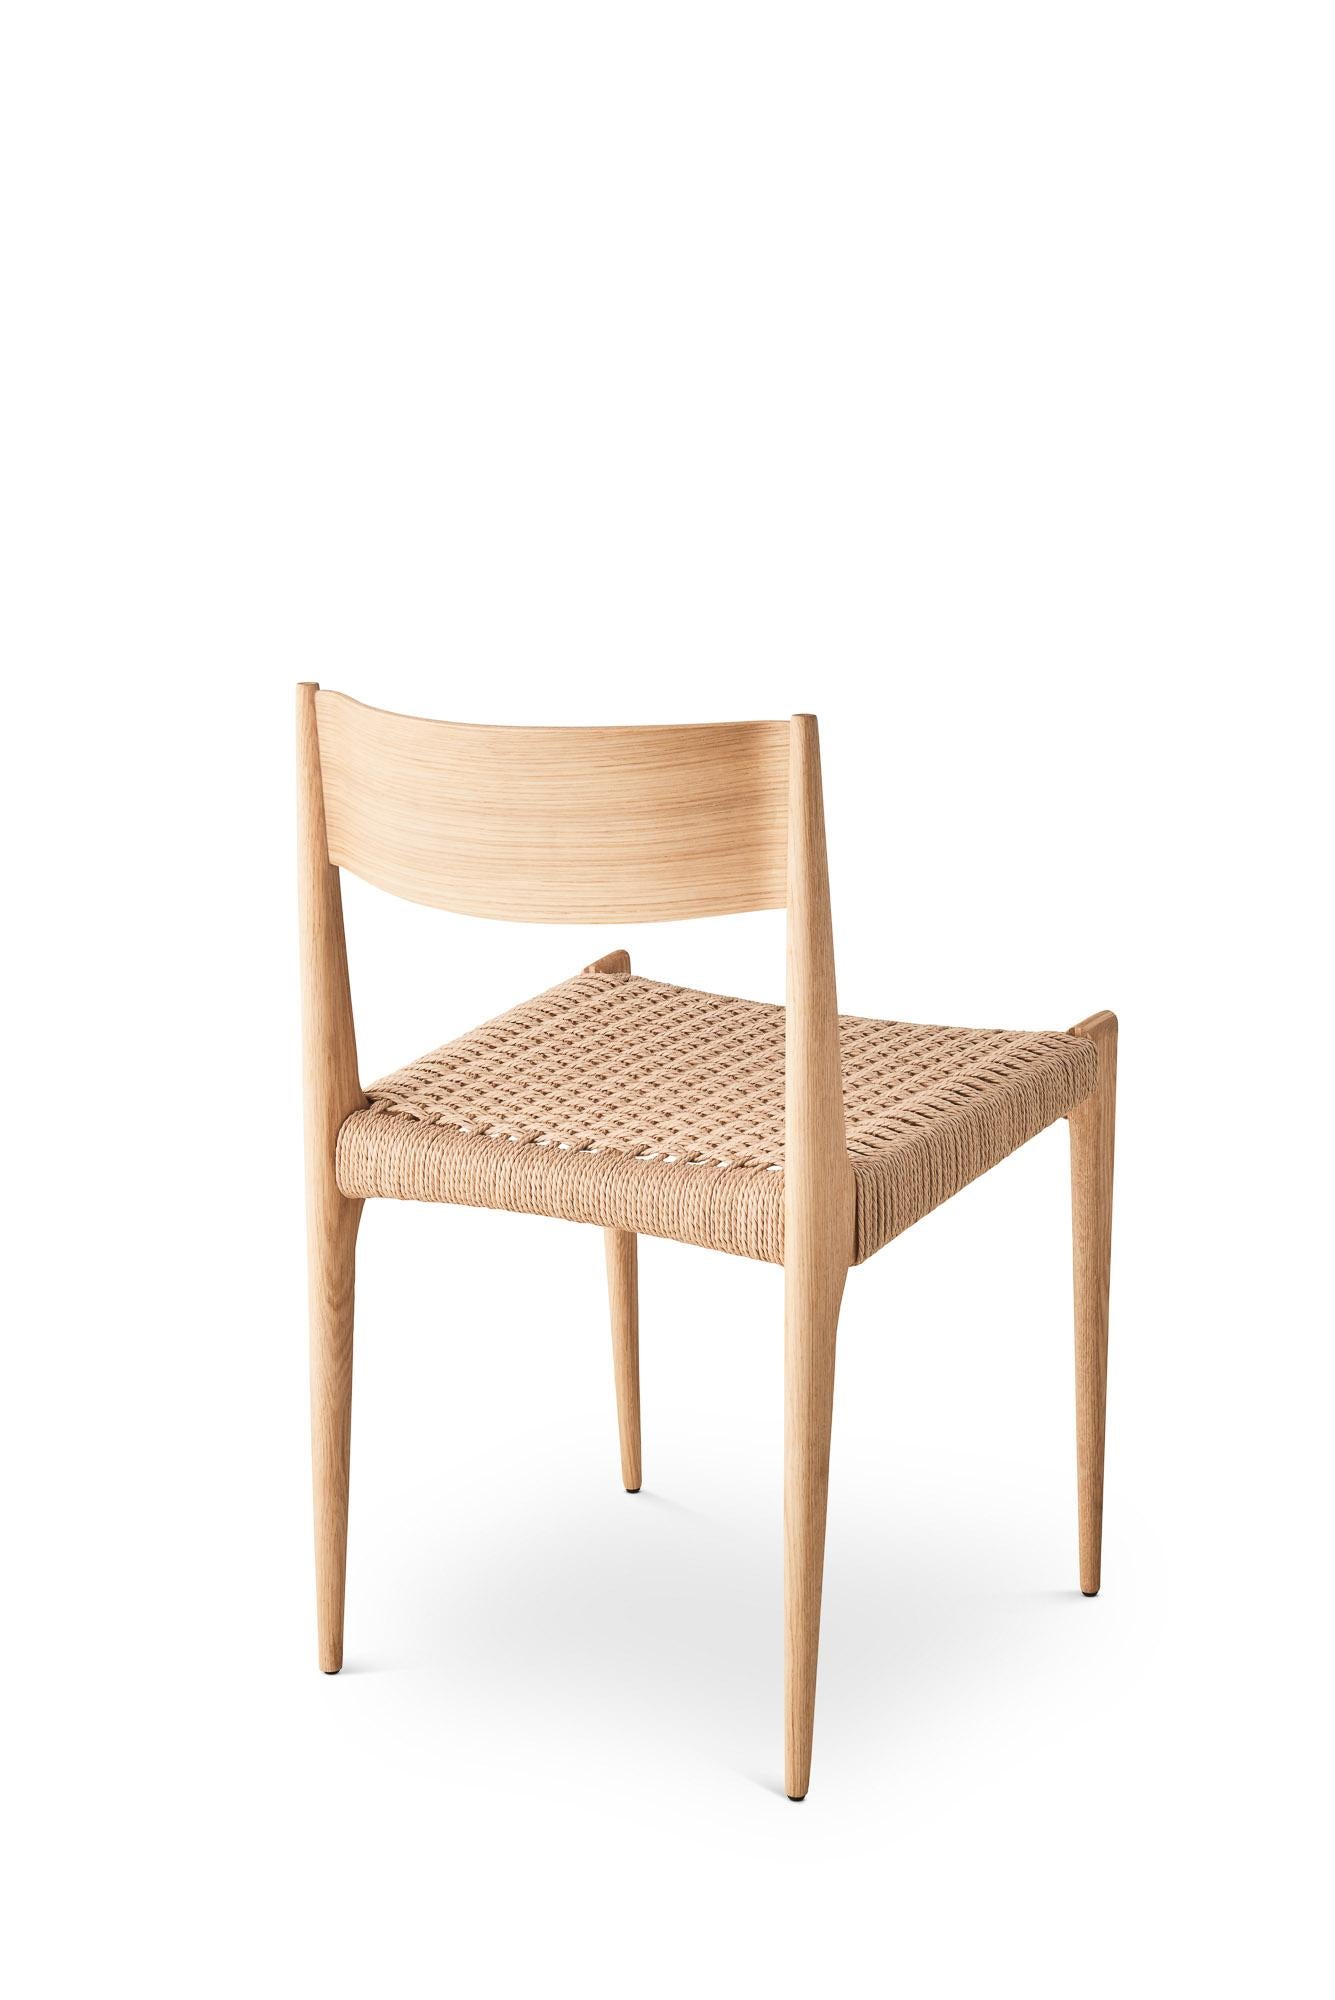 PIA Chair
Solid oak frame, paper cordel seat
Dimensions: H75 x 49 x 48 cm (seat height 45cm)

Wood:
– Oak
– Smoked oak
– Black lacquered oak
– Walnut

Paper cordel:
– Natural
– Black (Contact us)

--
The Pia chair signed by DK3 was imagined and